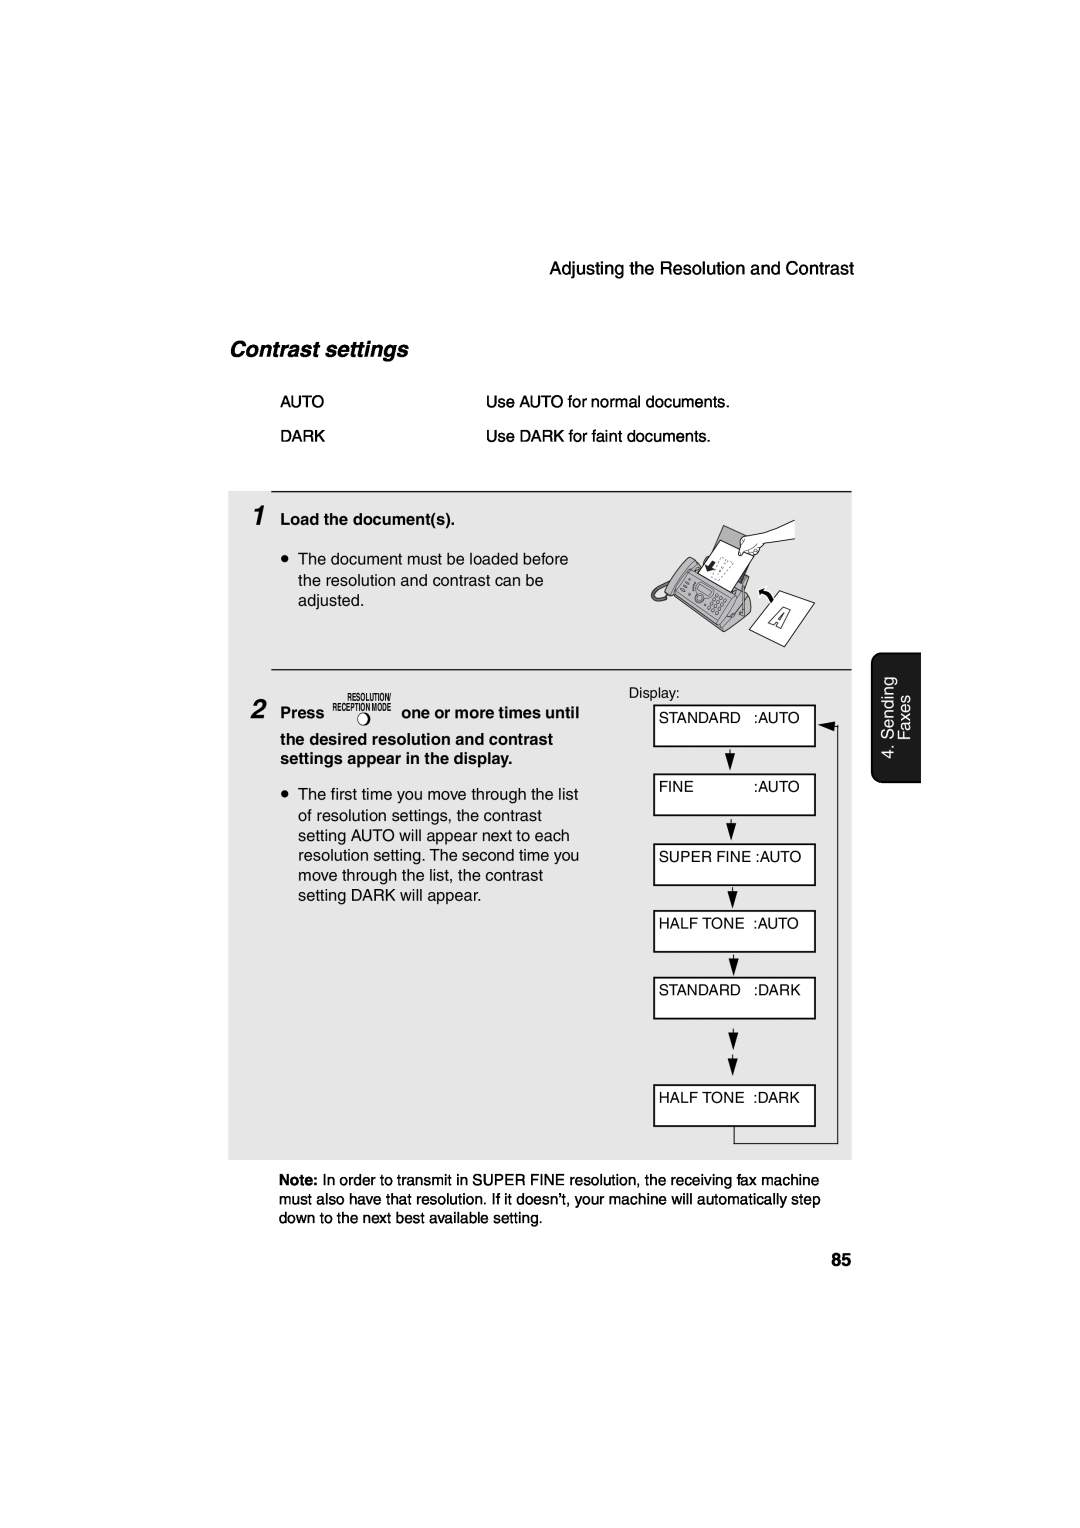 Sharp UX-CD600 operation manual Contrast settings, Sending, Faxes, Load the documents, one or more times until 